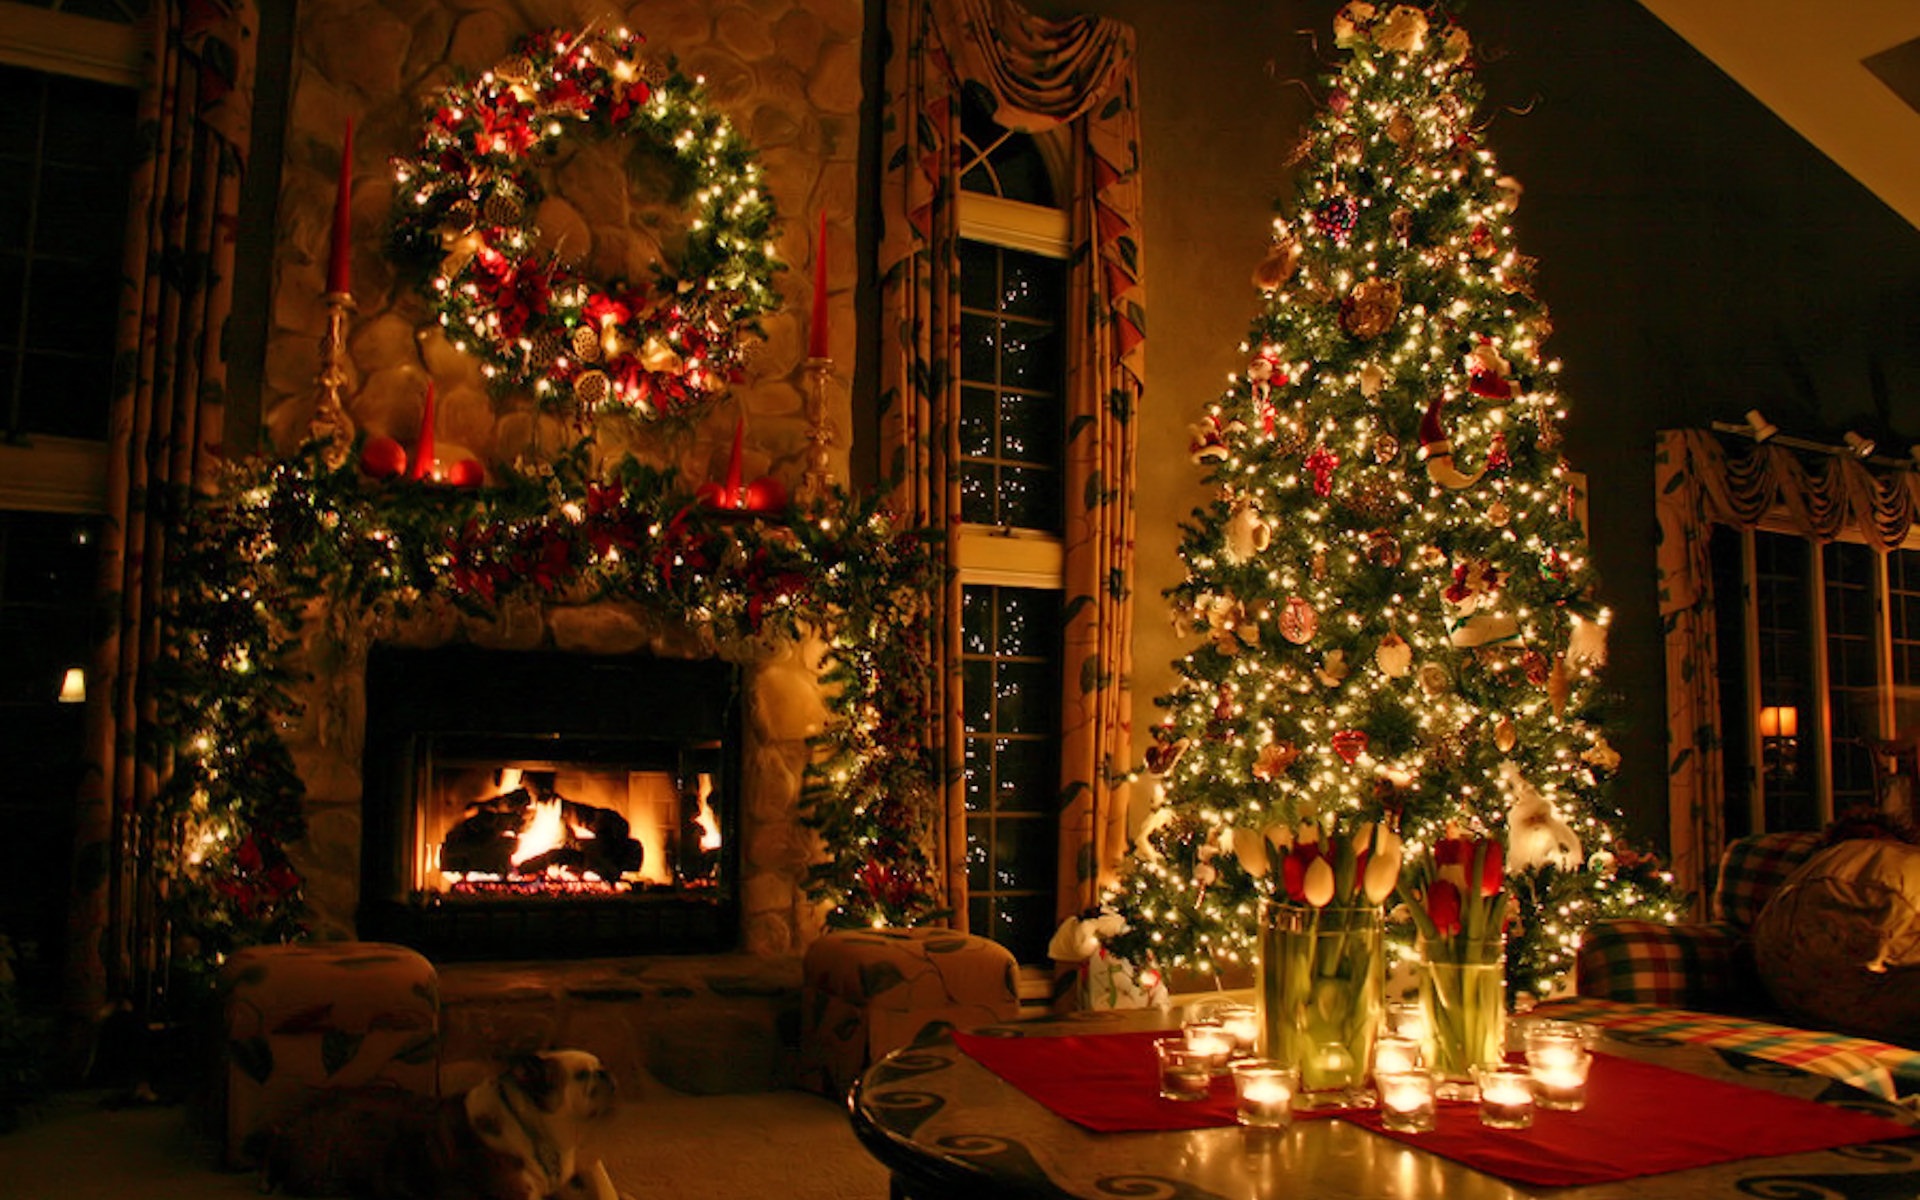 Christmas Pictures For Desktop Background On